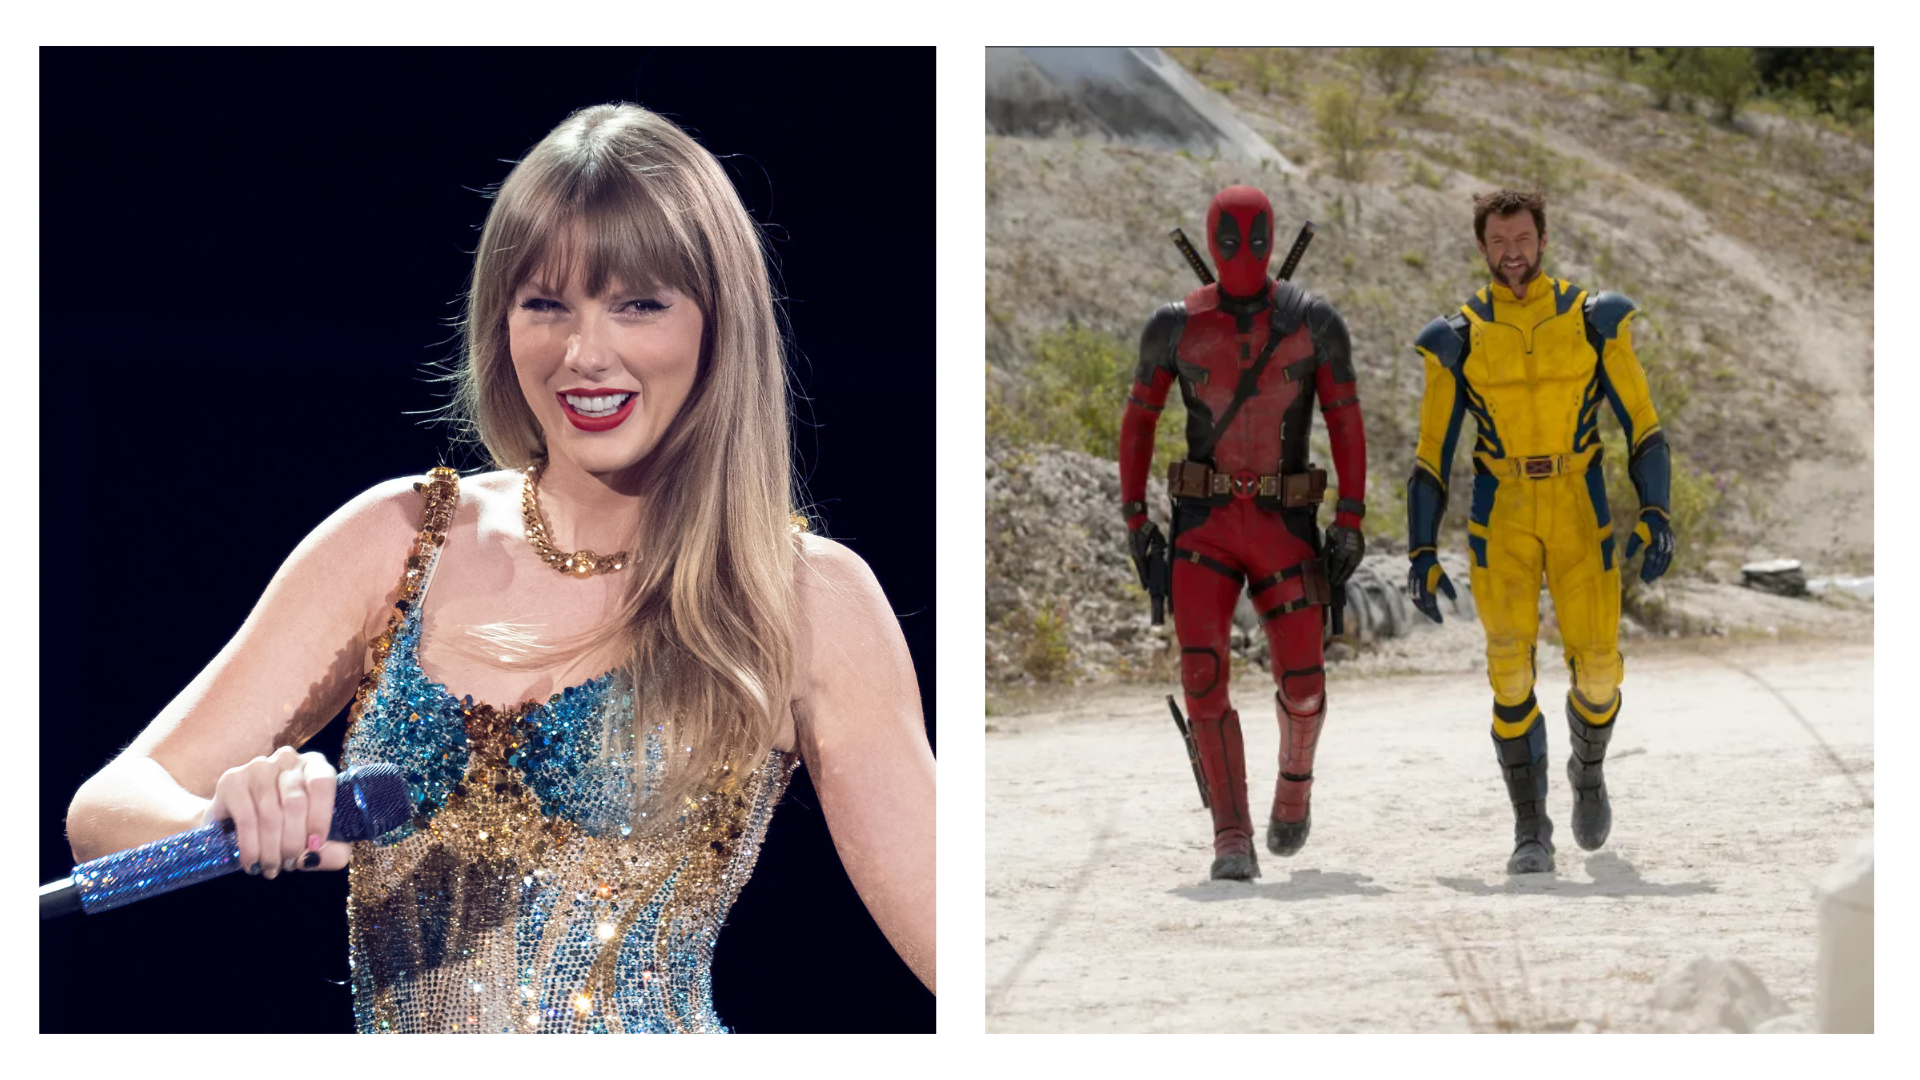 taylor swift at her eras tour getty images ryan reynolds as deadpool and hugh jackman as wolverine in deadpool 3 jay maidment 20th century studios marvel studios